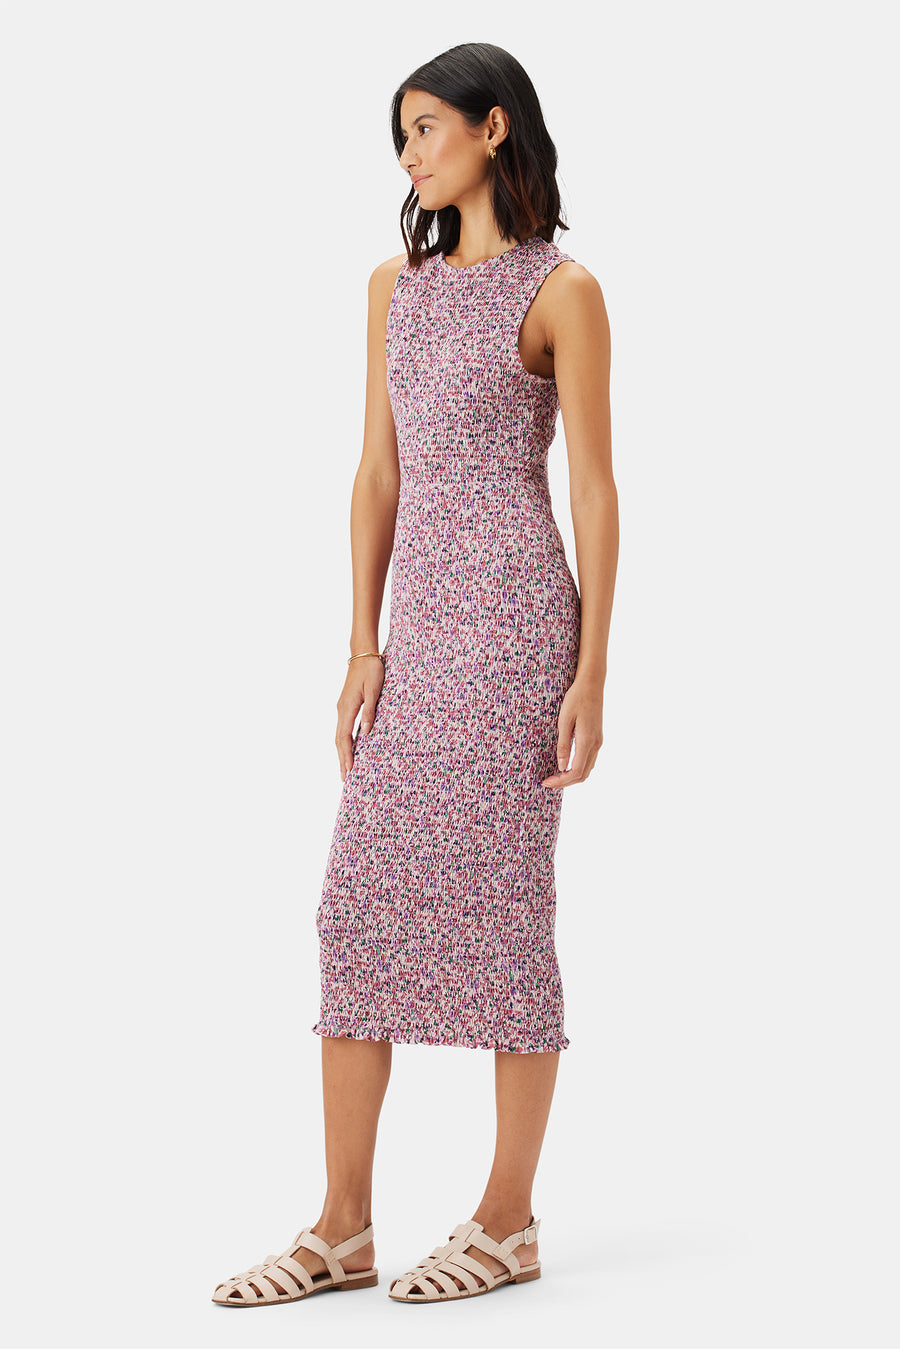 Isabella Dress - Alessia Mulberry